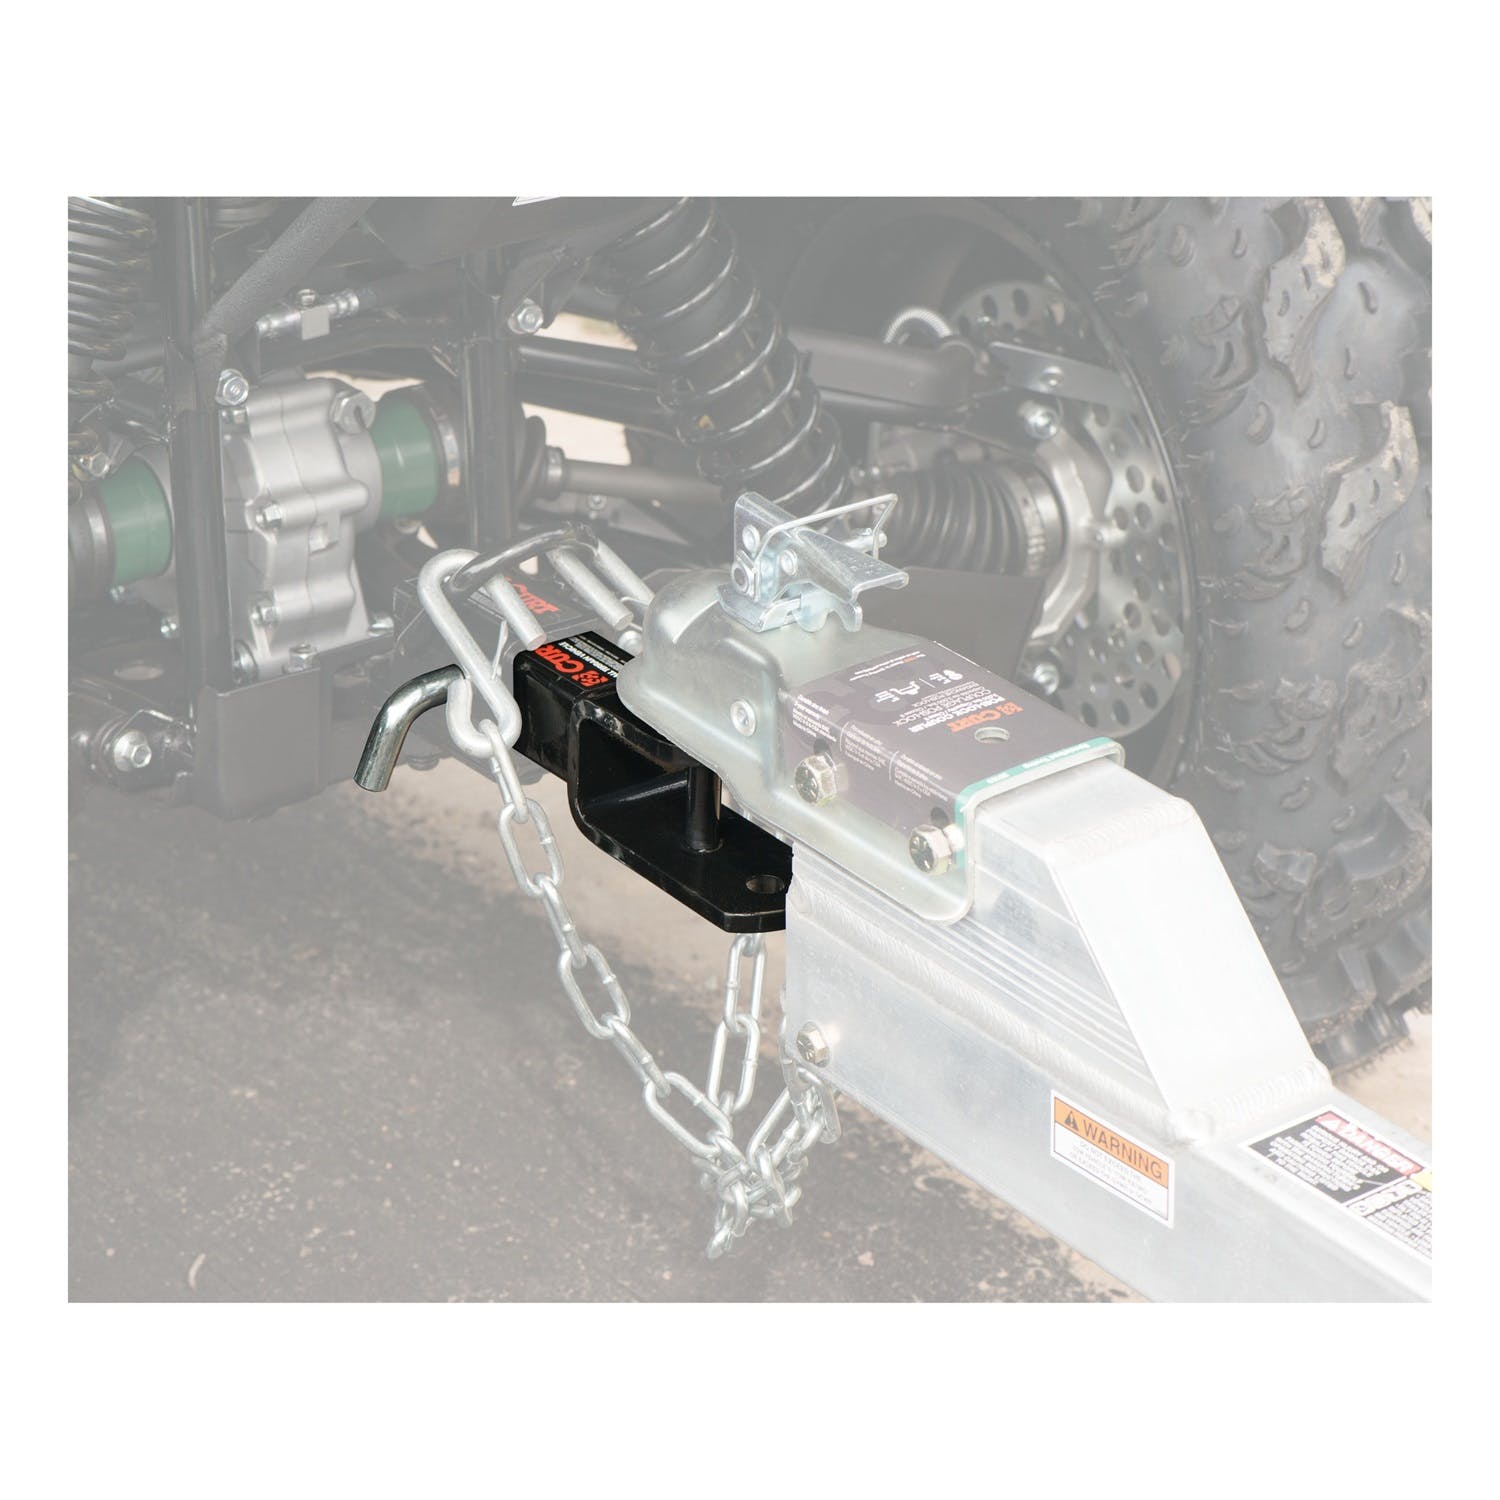 CURT 45005 3-in-1 ATV Ball Mount with 2 Shank and 1-7/8 Trailer Ball